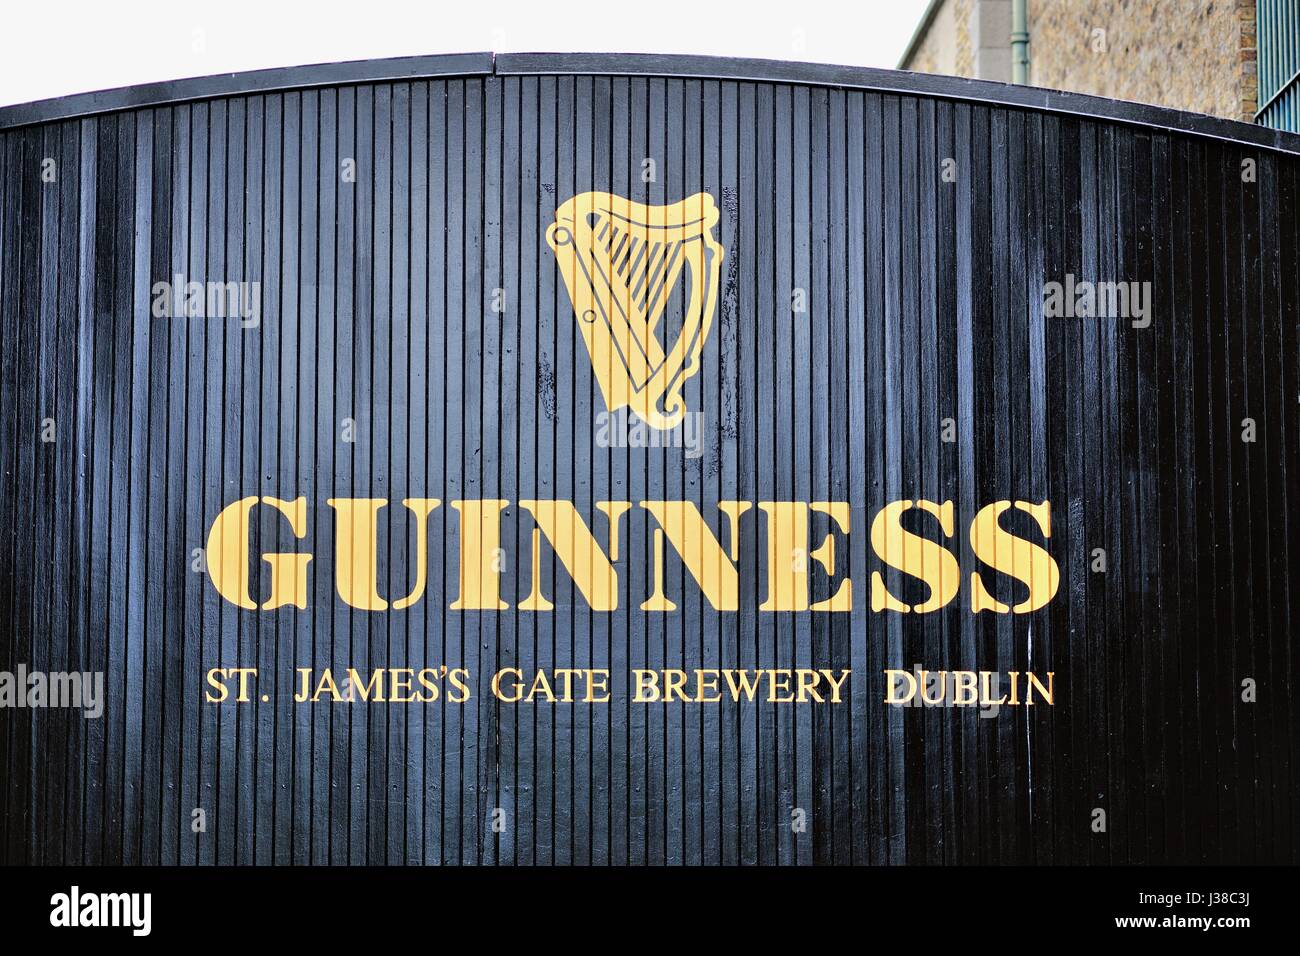 Gate at Guinness Storehouse in St. James Gate. Guinness has brewed beer in Ireland since 1759 and is the largest brewery in Europe. Dublin, Ireland. Stock Photo